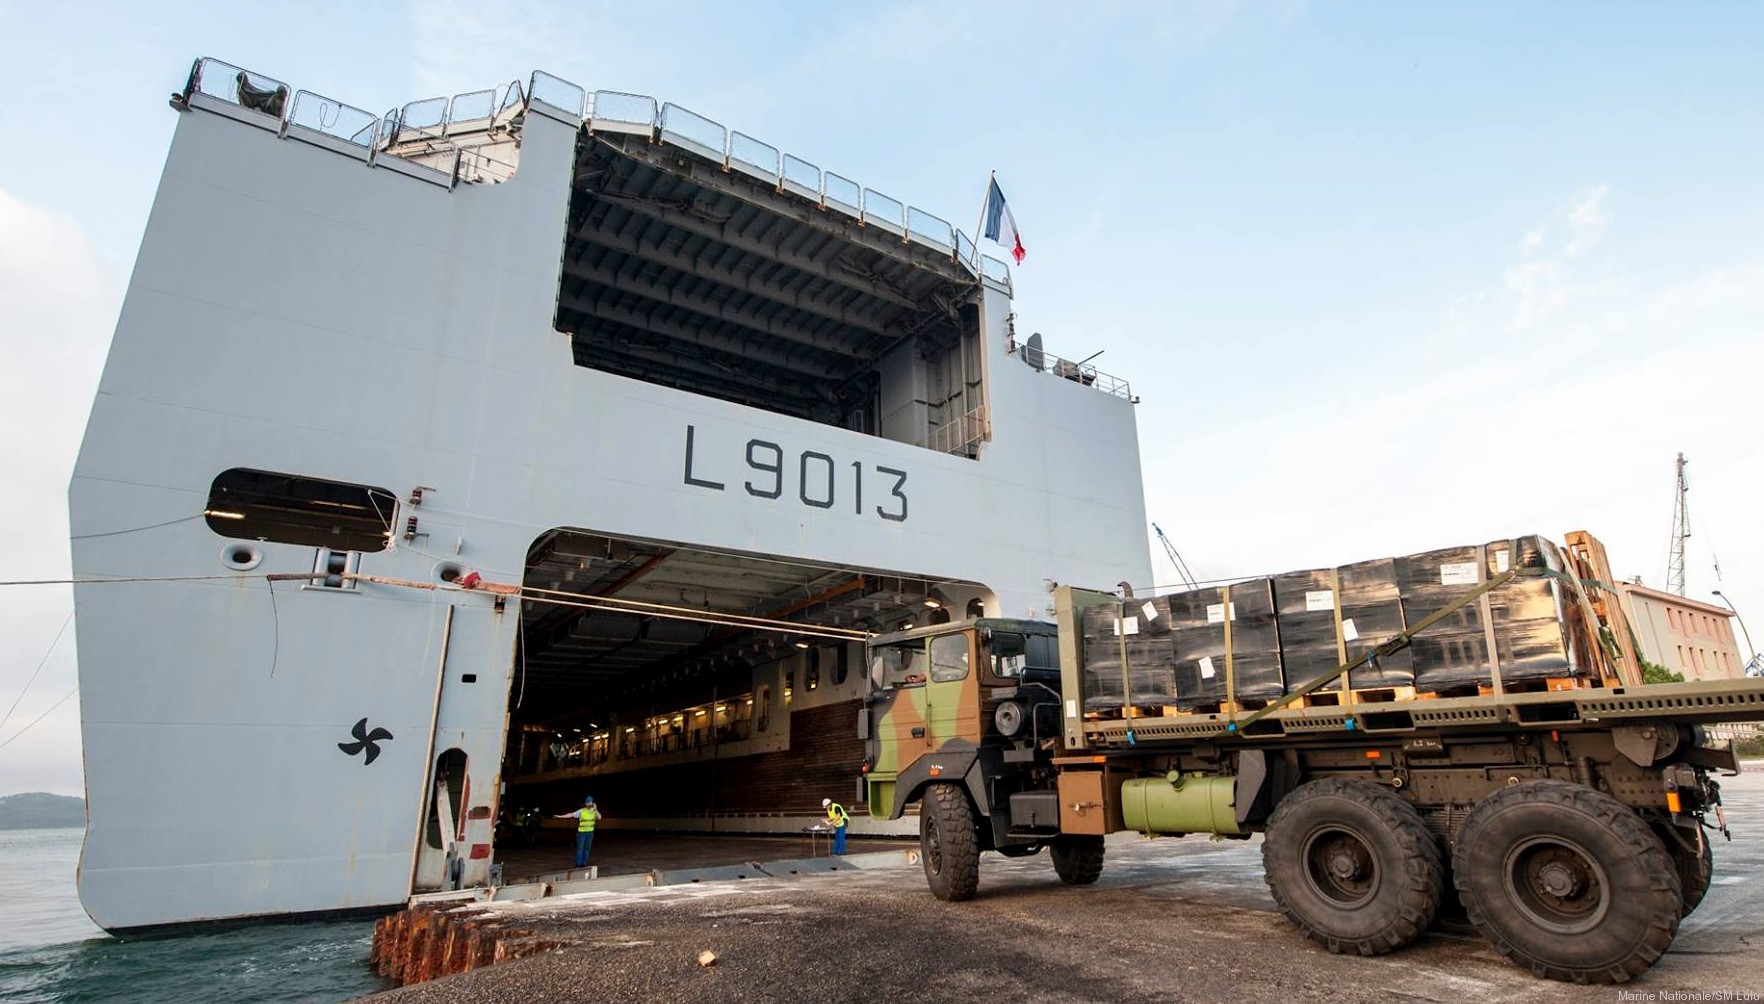 l-9013 fs mistral amphibious assault command ship french navy marine nationale 48